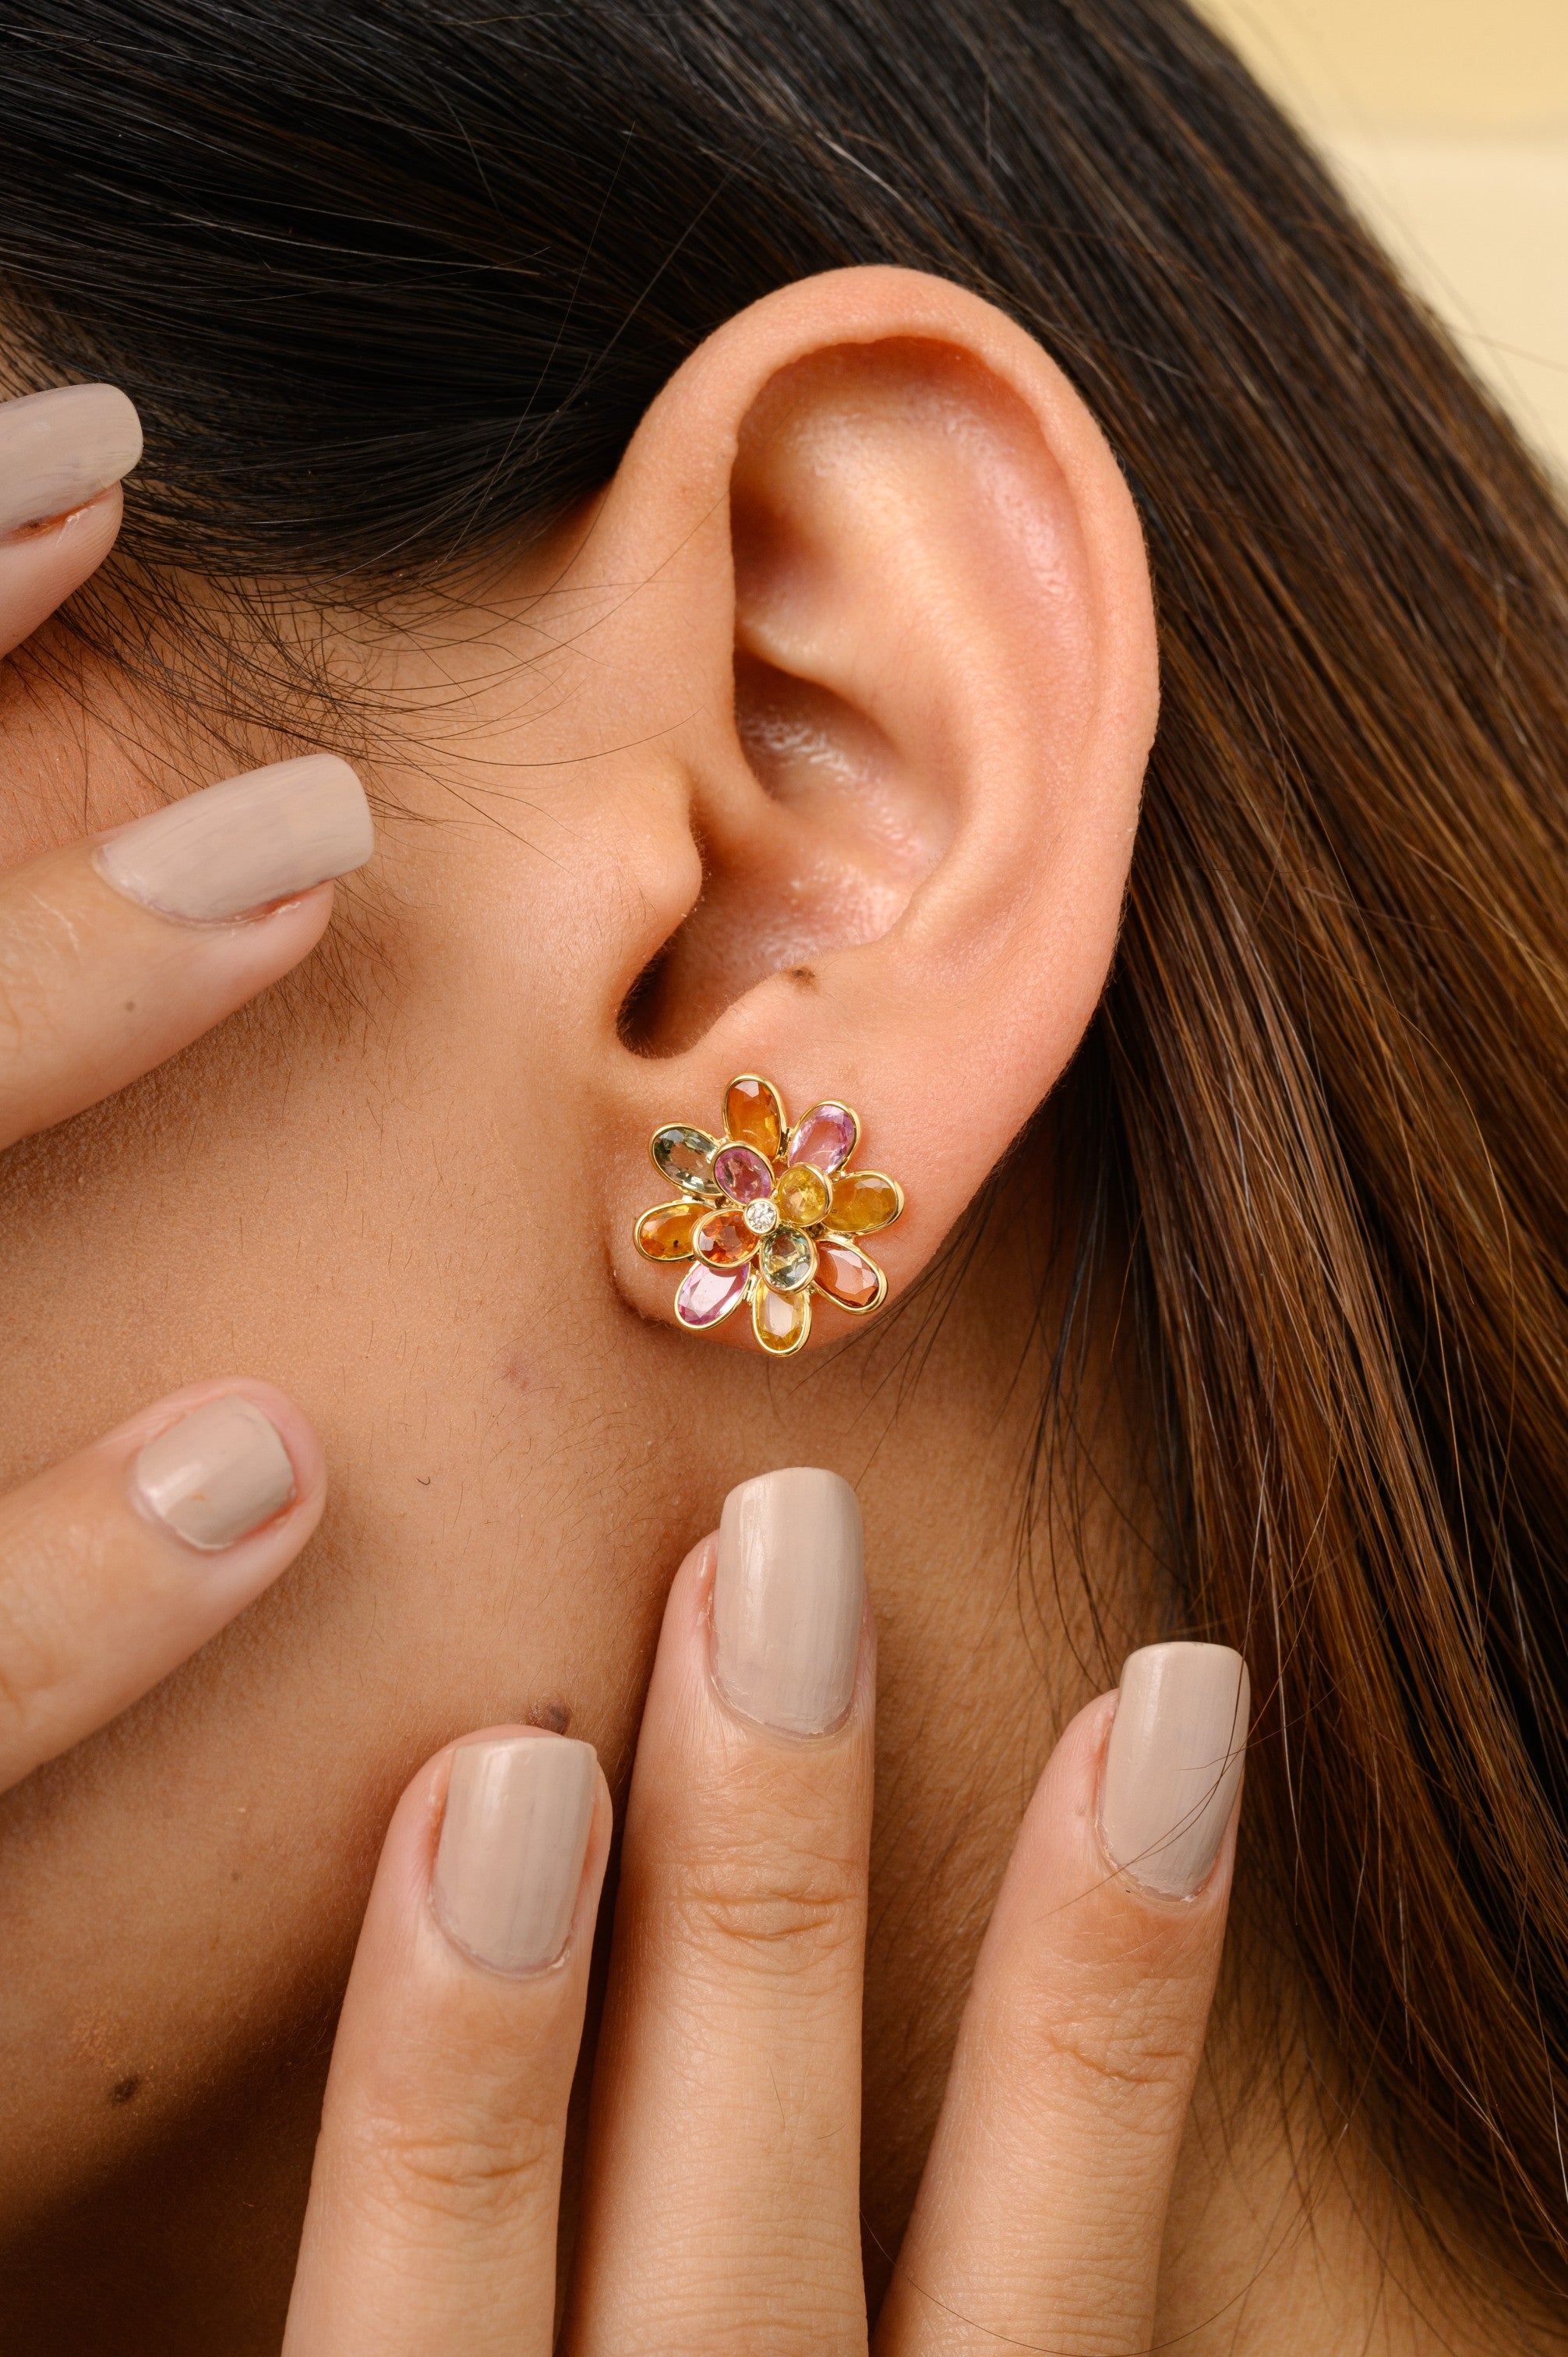 18K Solid Yellow Gold Multi Sapphire Floral Stud